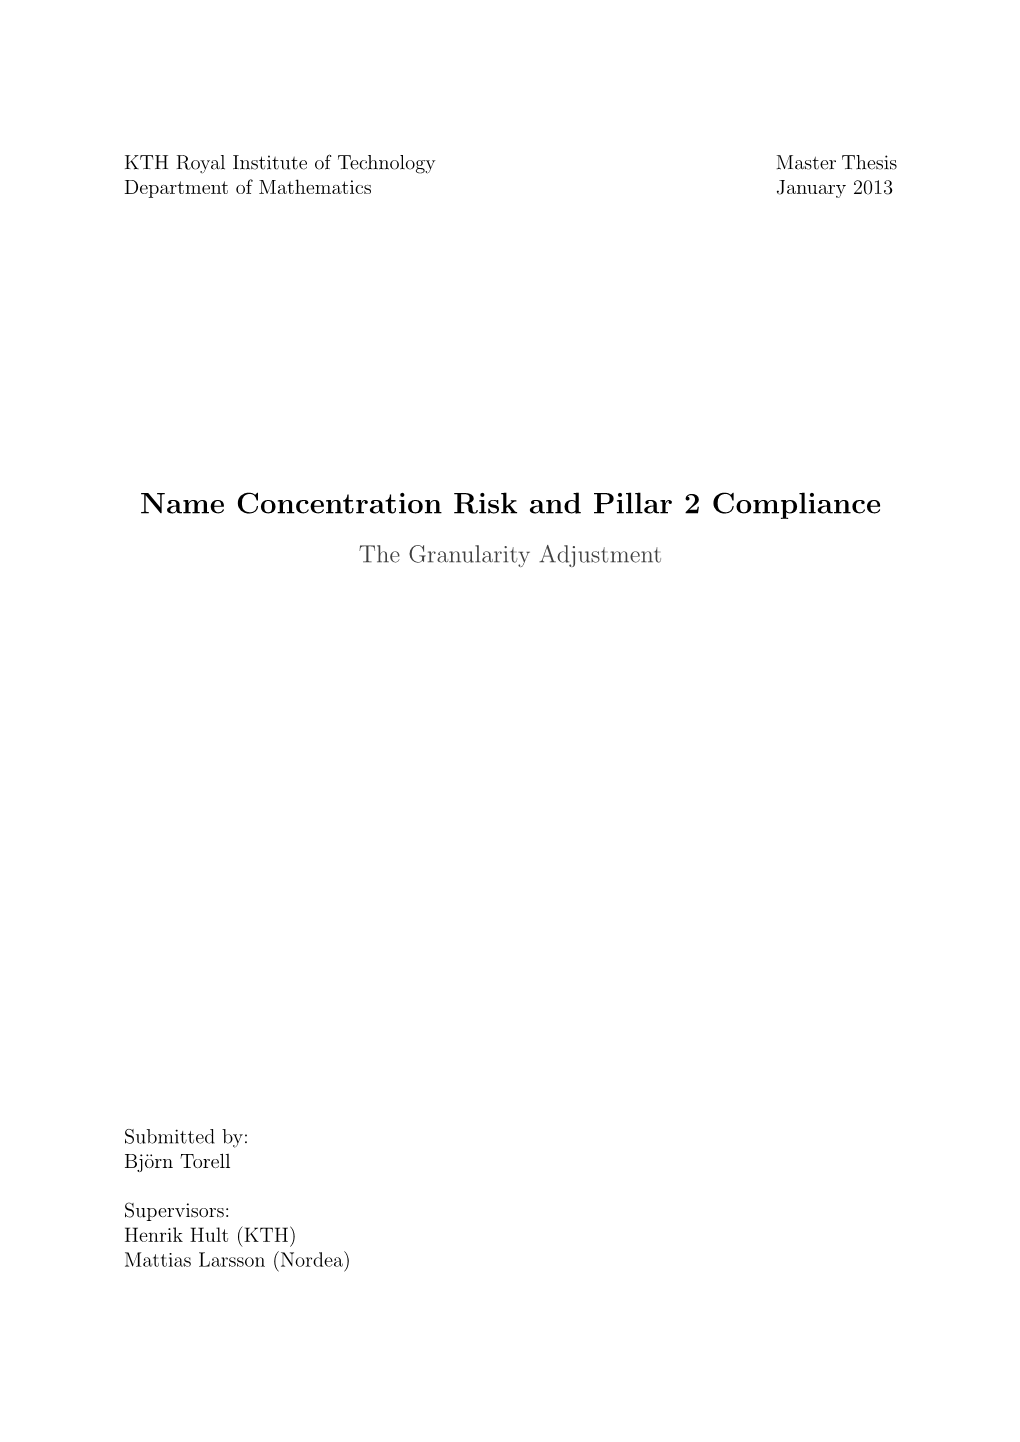 Name Concentration Risk and Pillar 2 Compliance the Granularity Adjustment